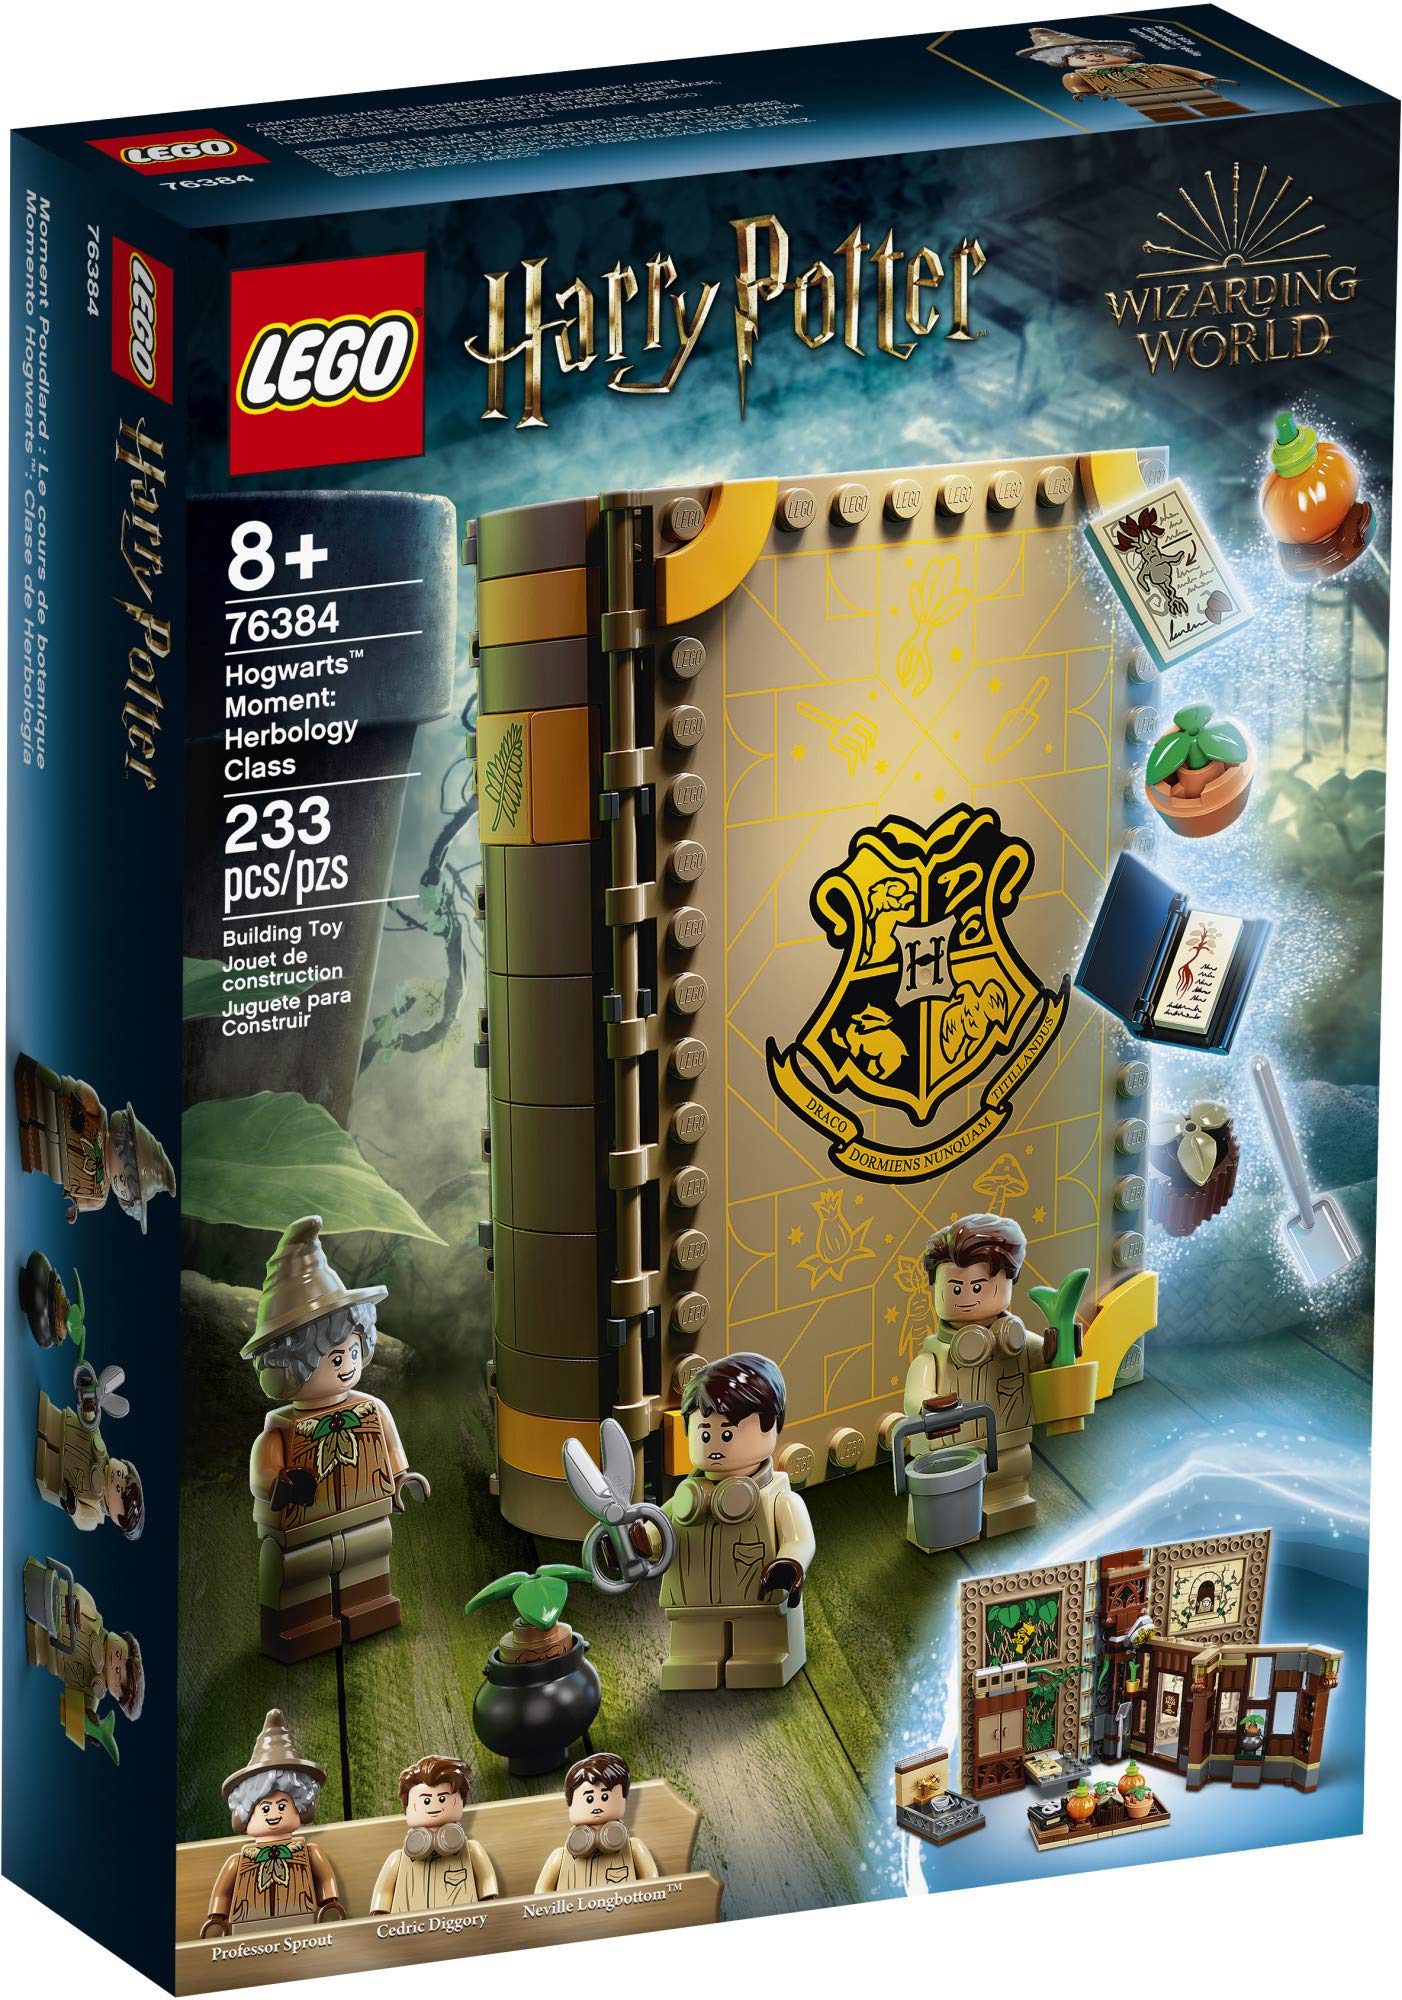 LEGO Harry Potter Hogwarts Moment: Herbology Class 76384 Professor Sprout’s Classroom in a Brick Book Playset, New 2021 (233 Pieces)